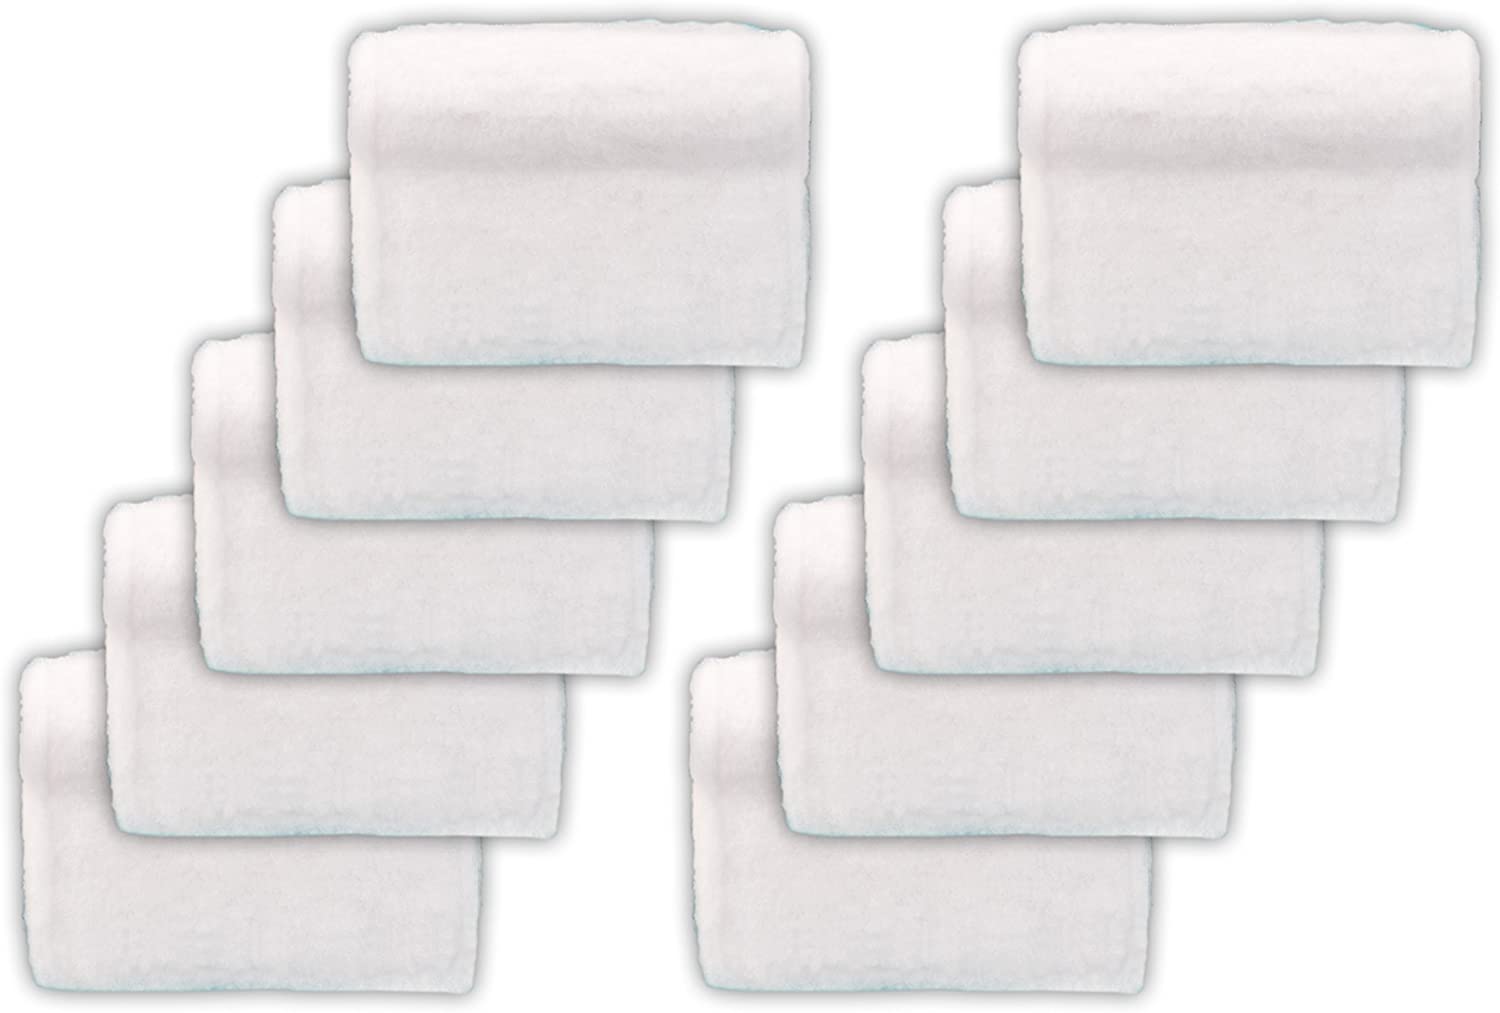 Baseboard Buddy 10 Pack of Microfiber Replacement Pads